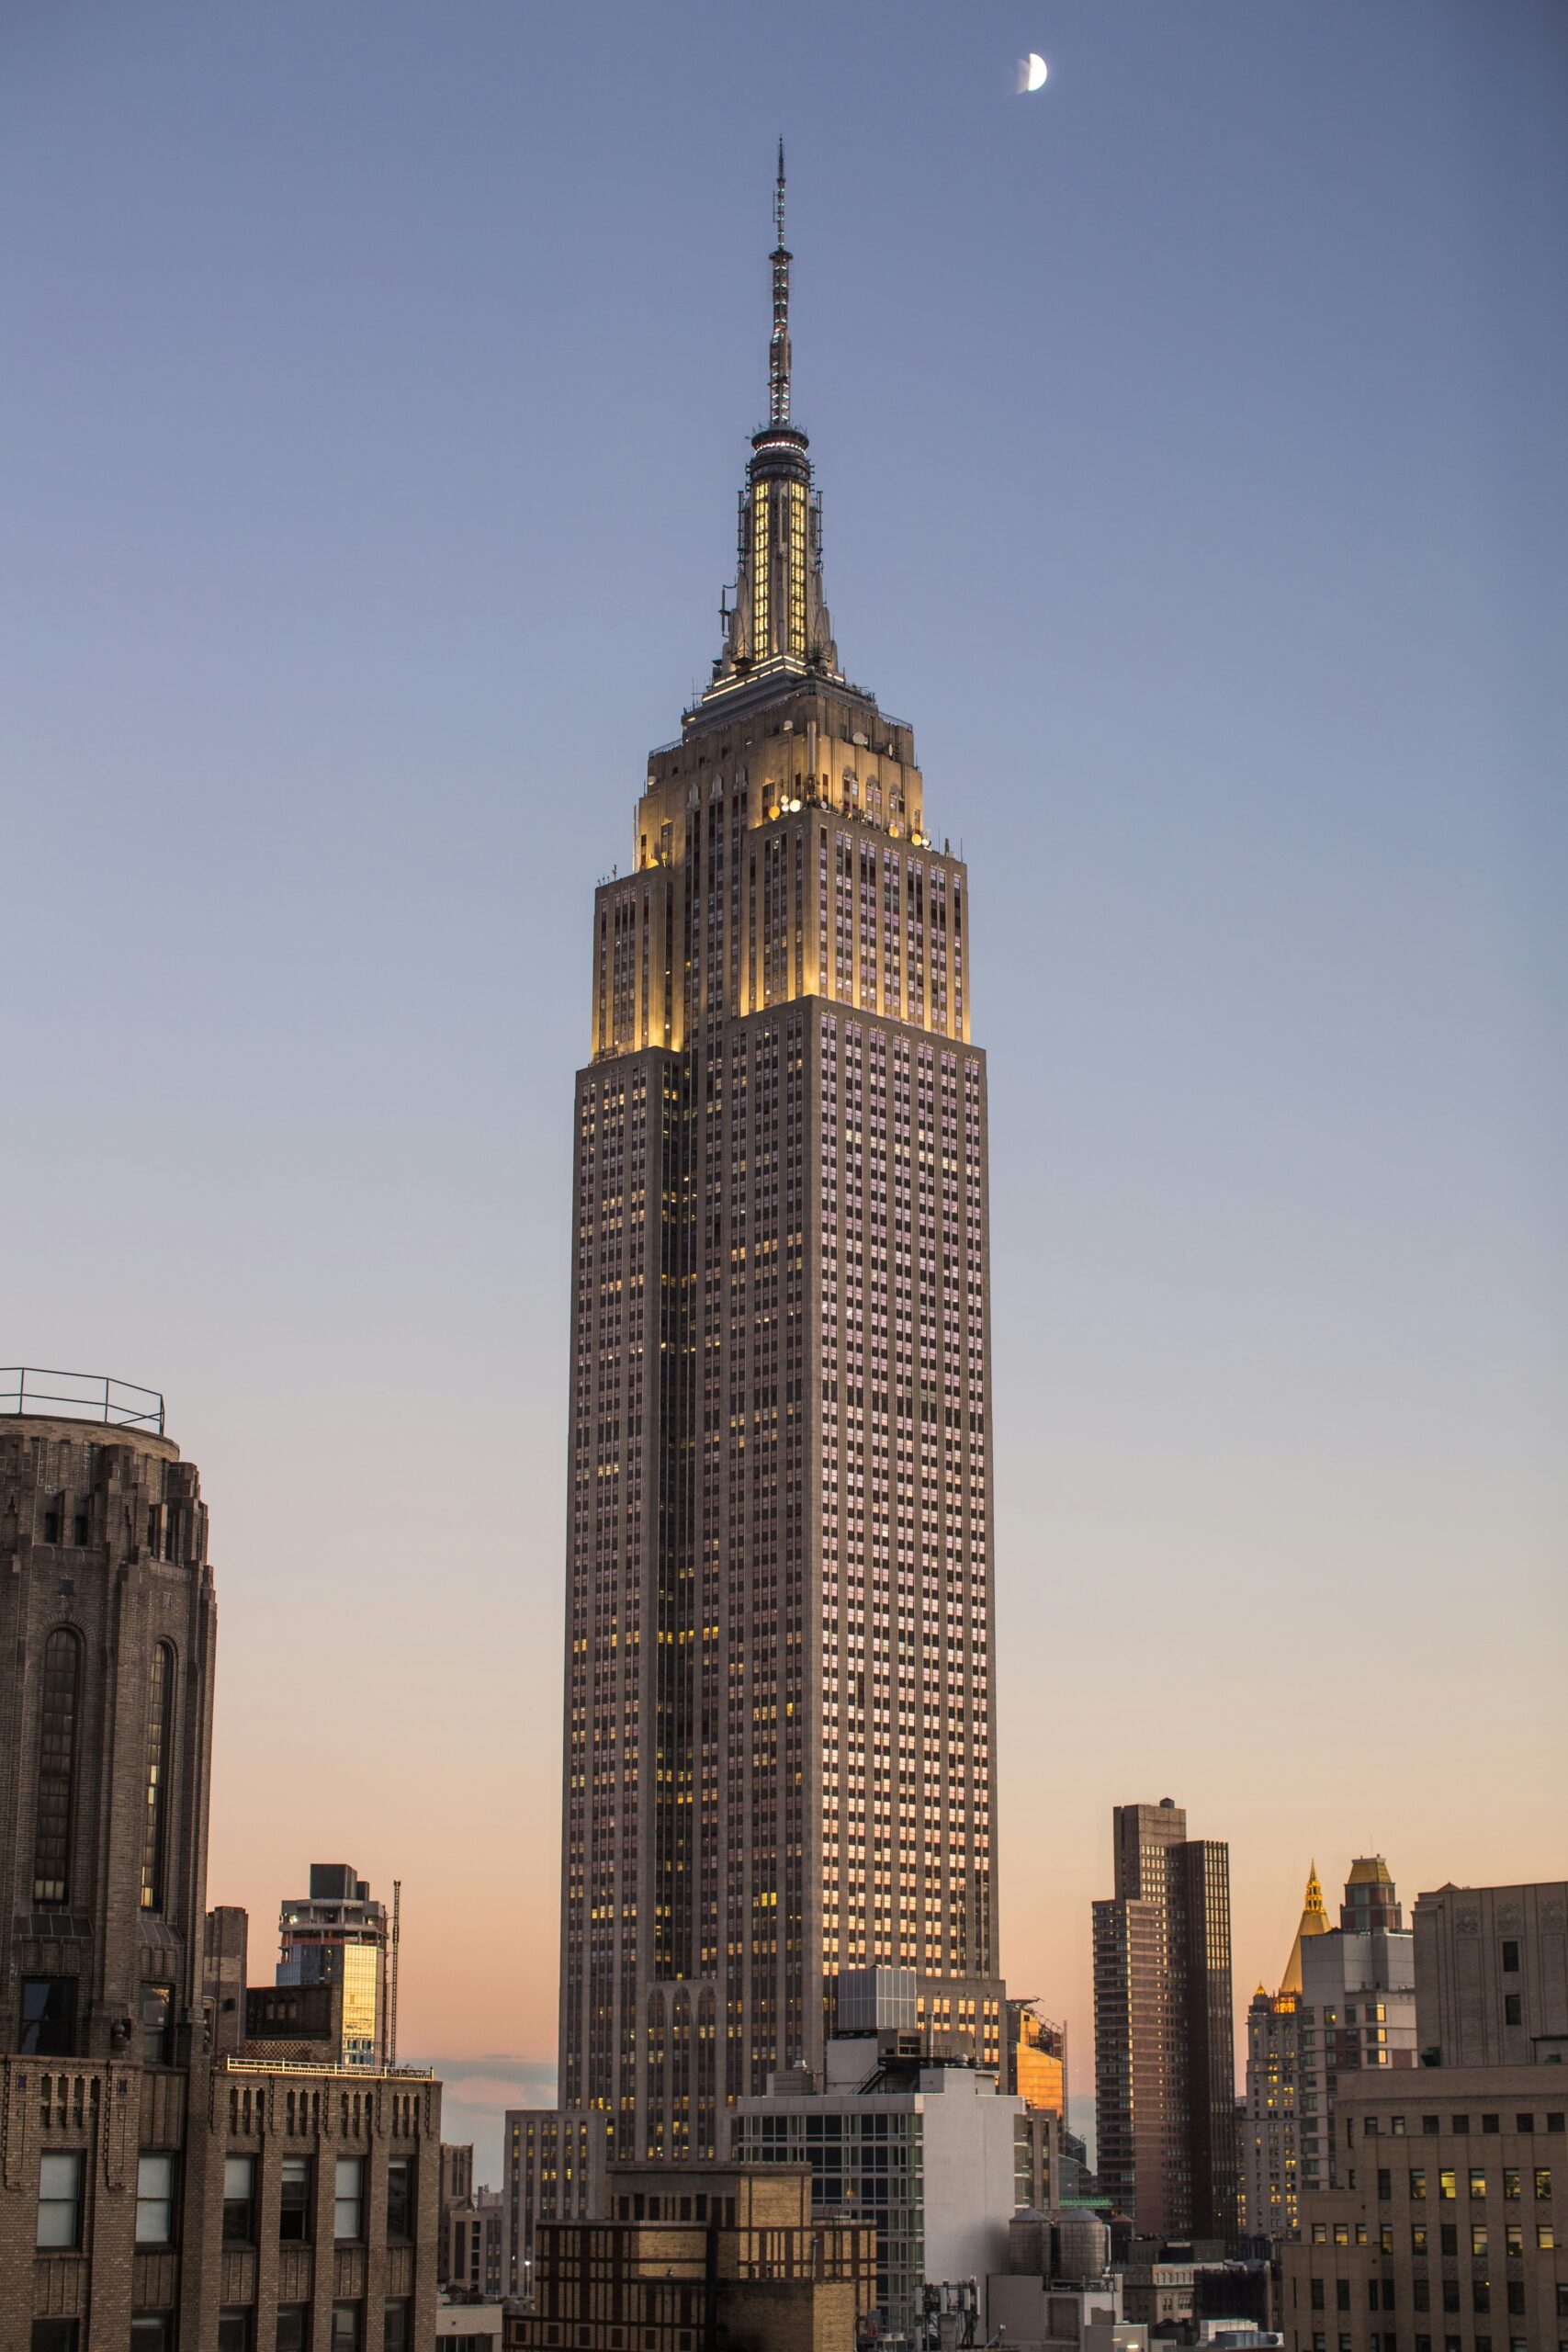 The Empire State Building reaches into New York's skyline above.